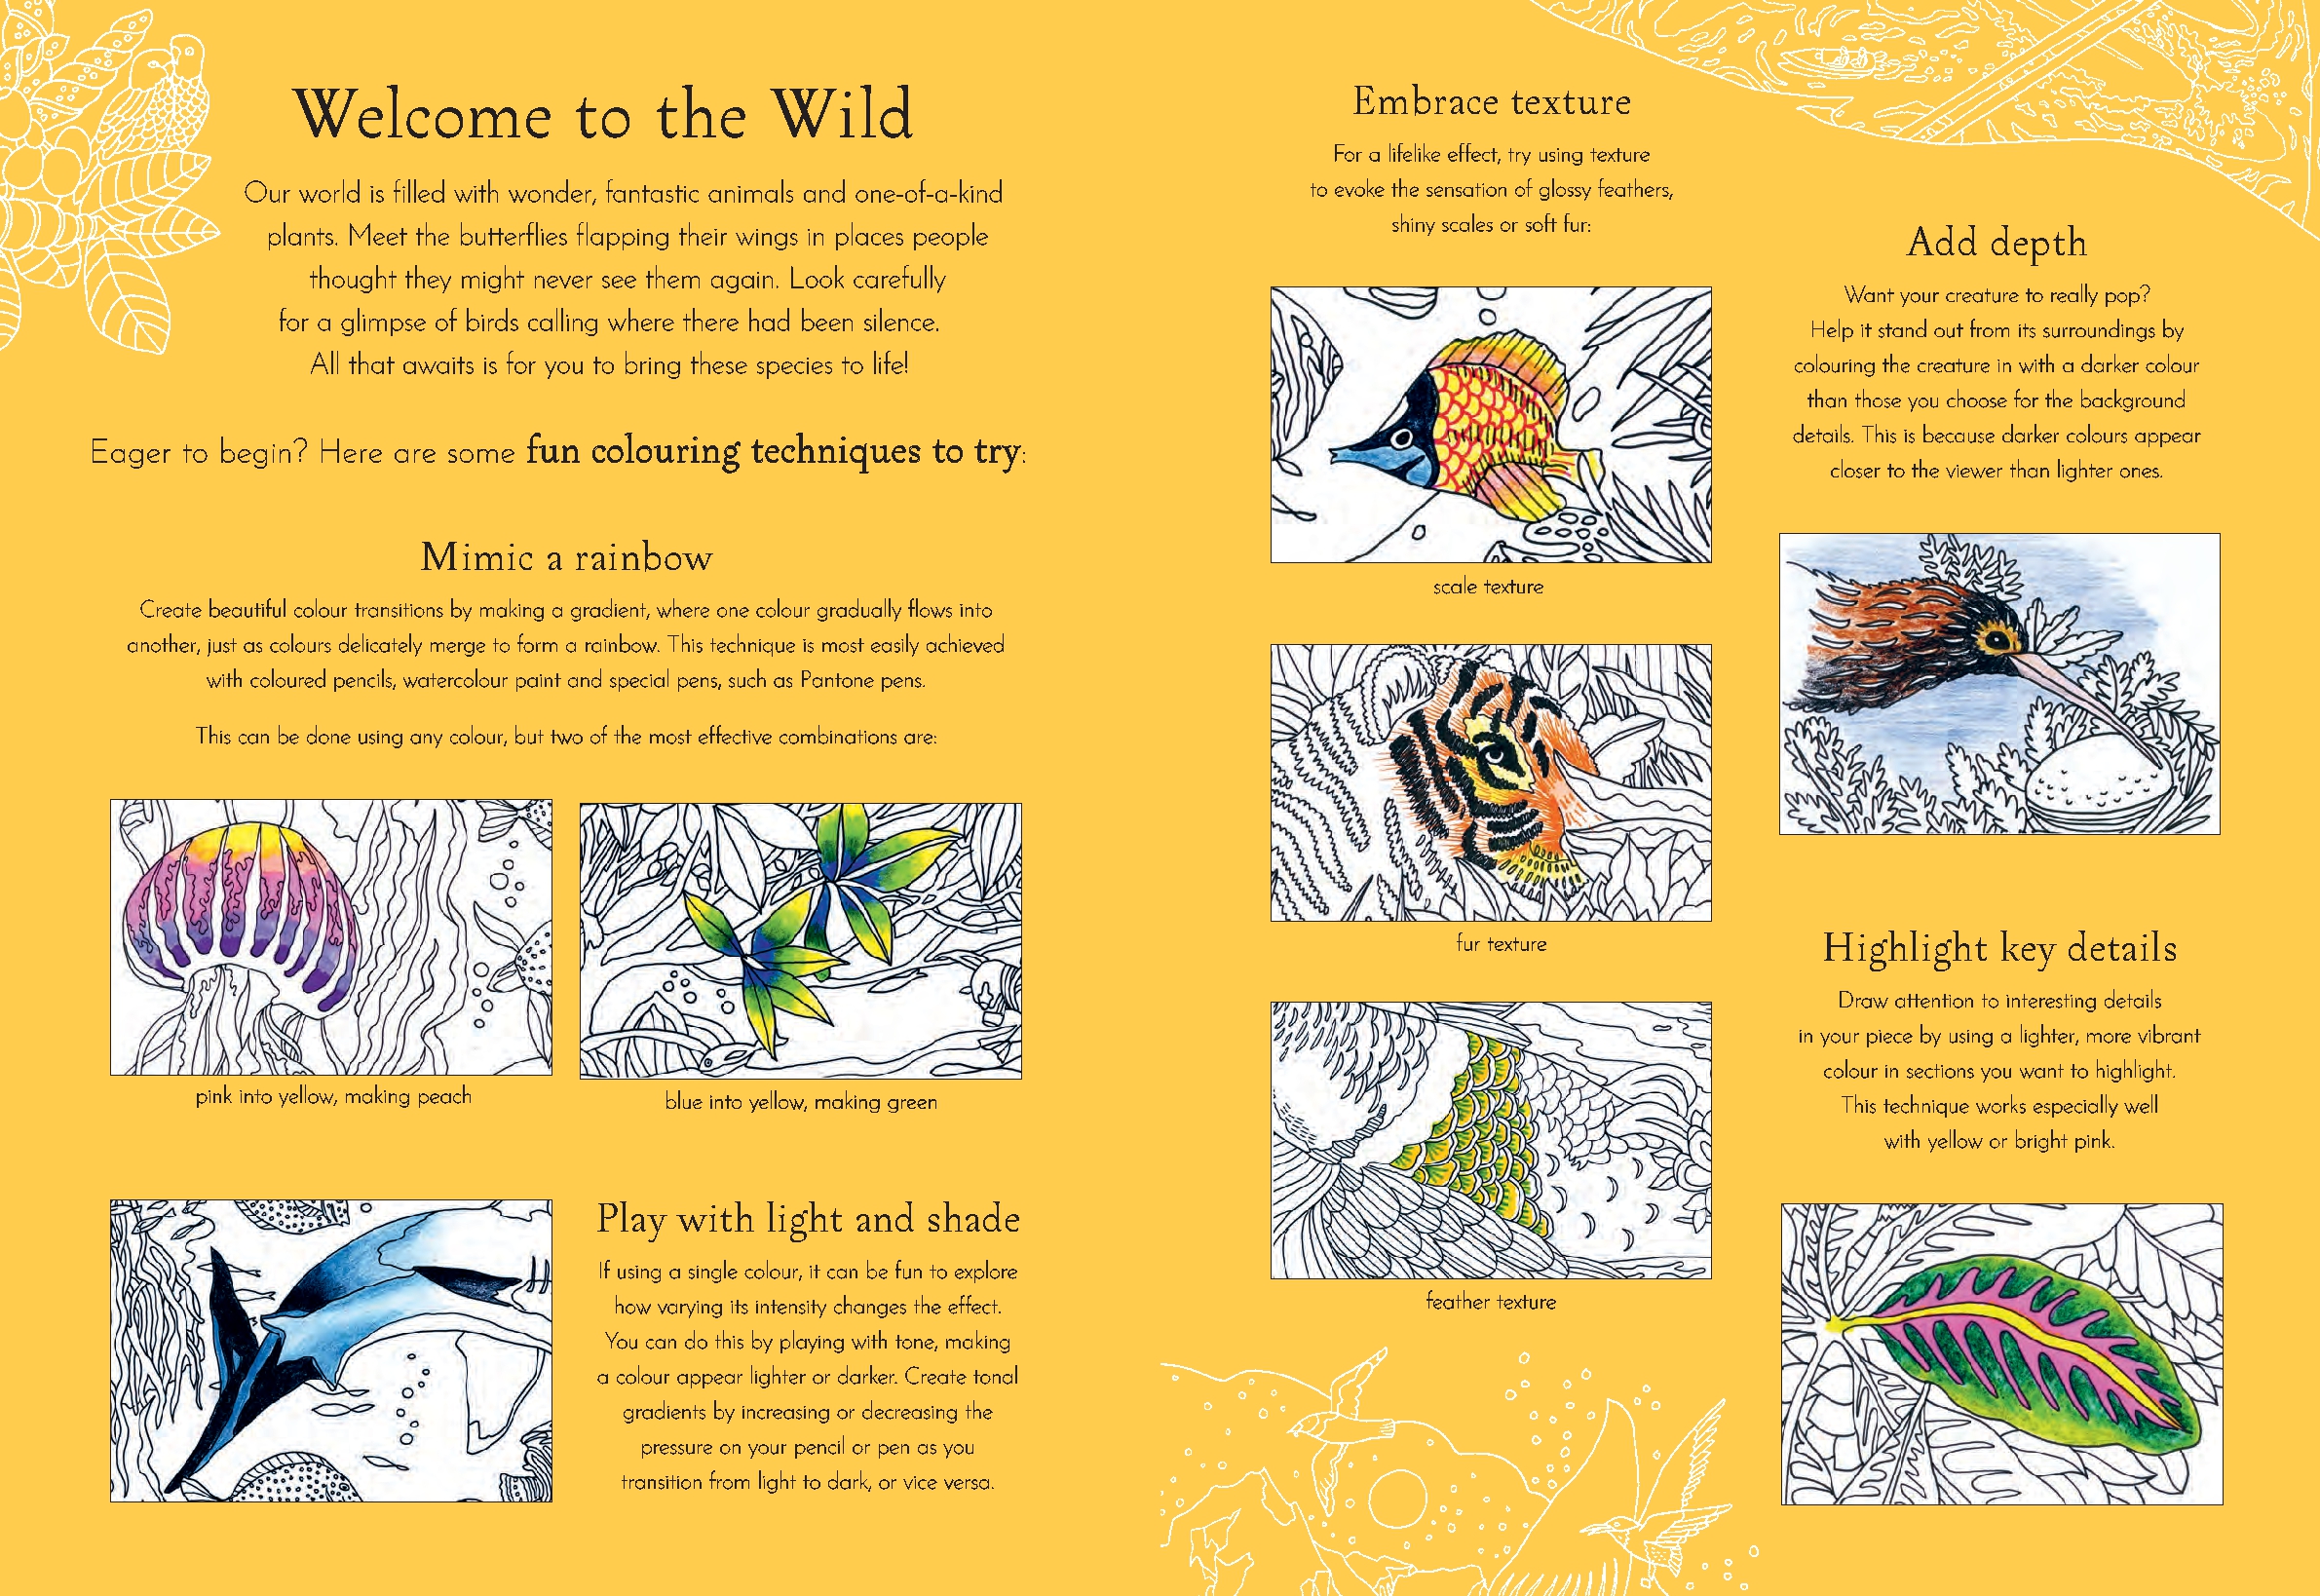 Return of the Wild Coloring Book